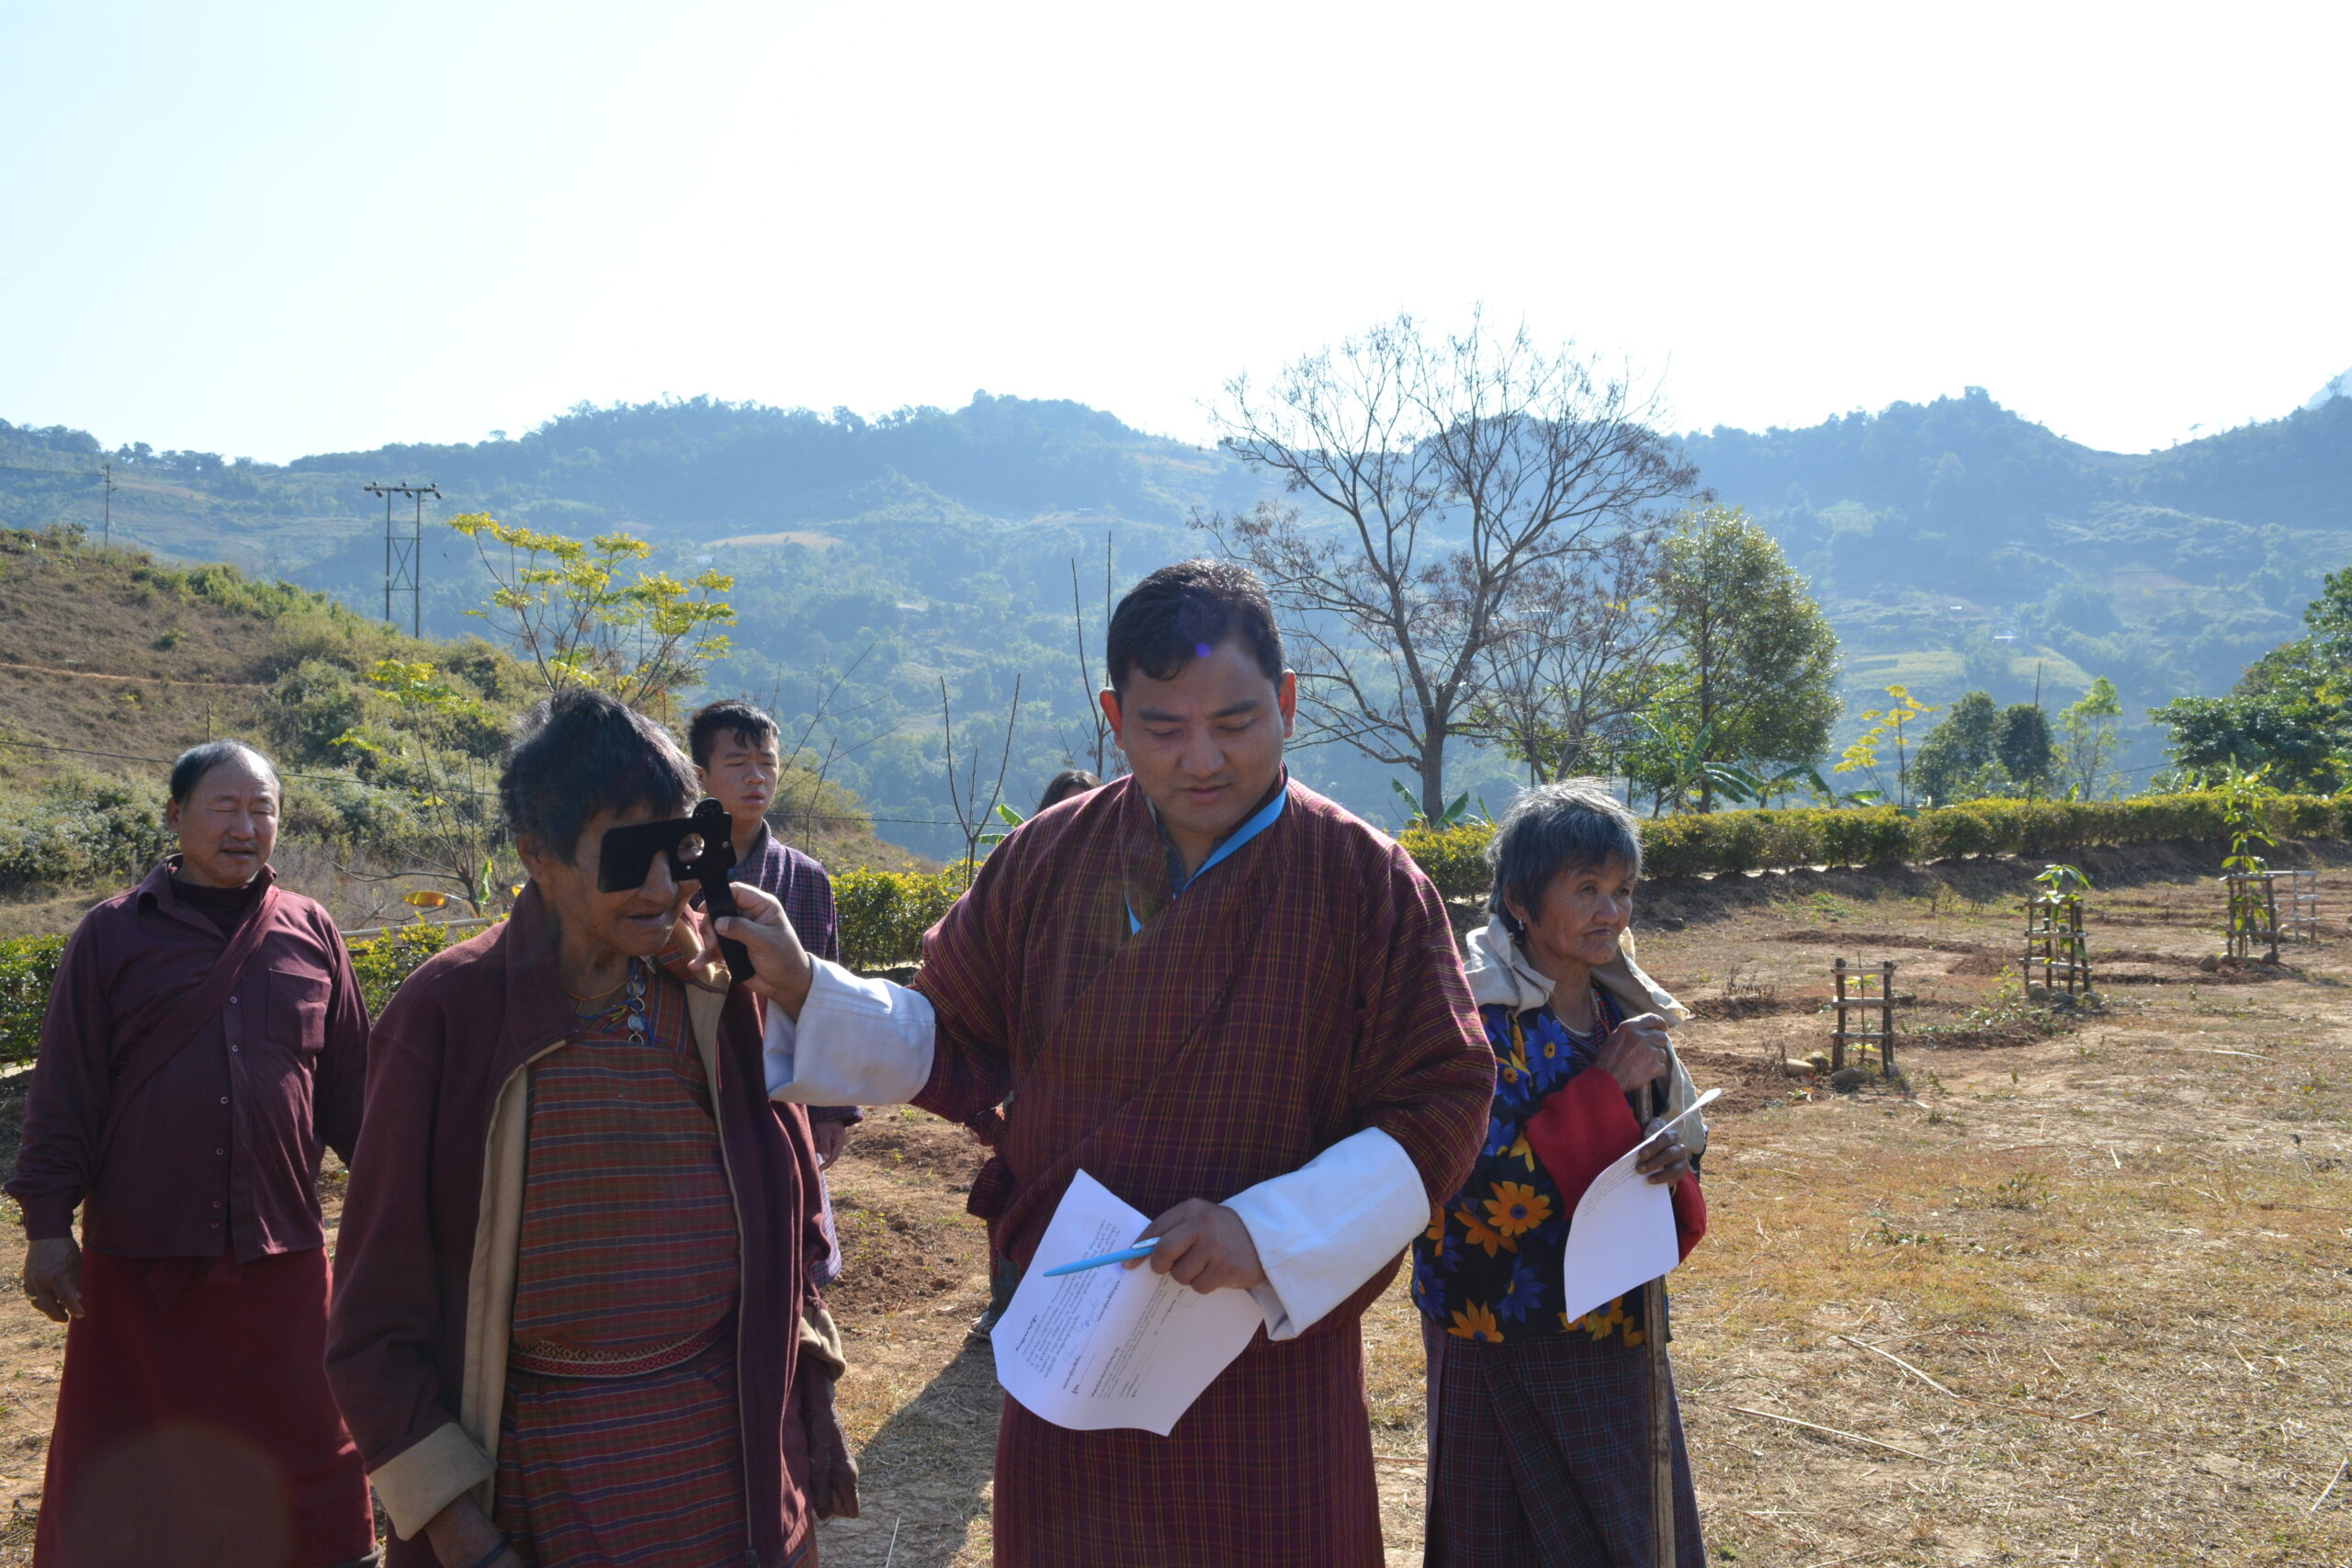 Collecting data through a community-based interview bhutan